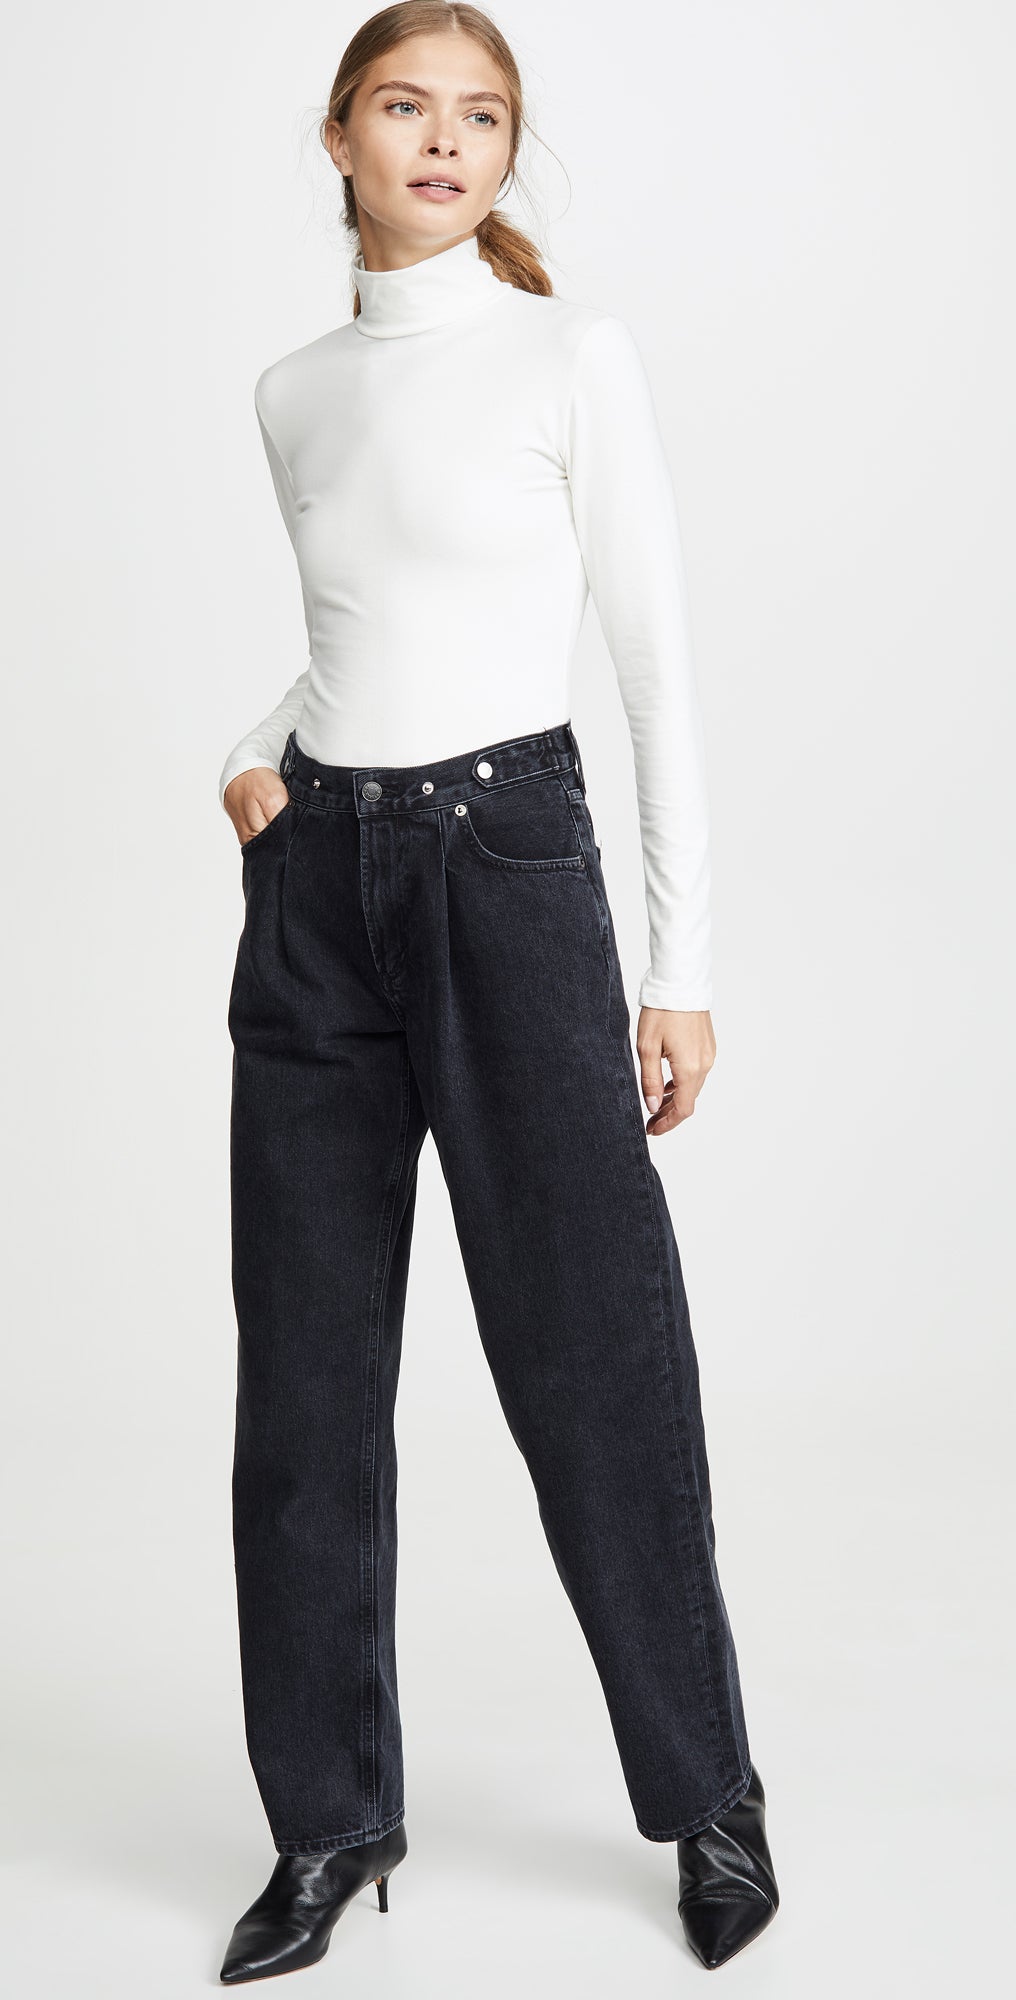 BLACK BAGGY PLEATED OVERSIZED JEANS BY AGOLDE